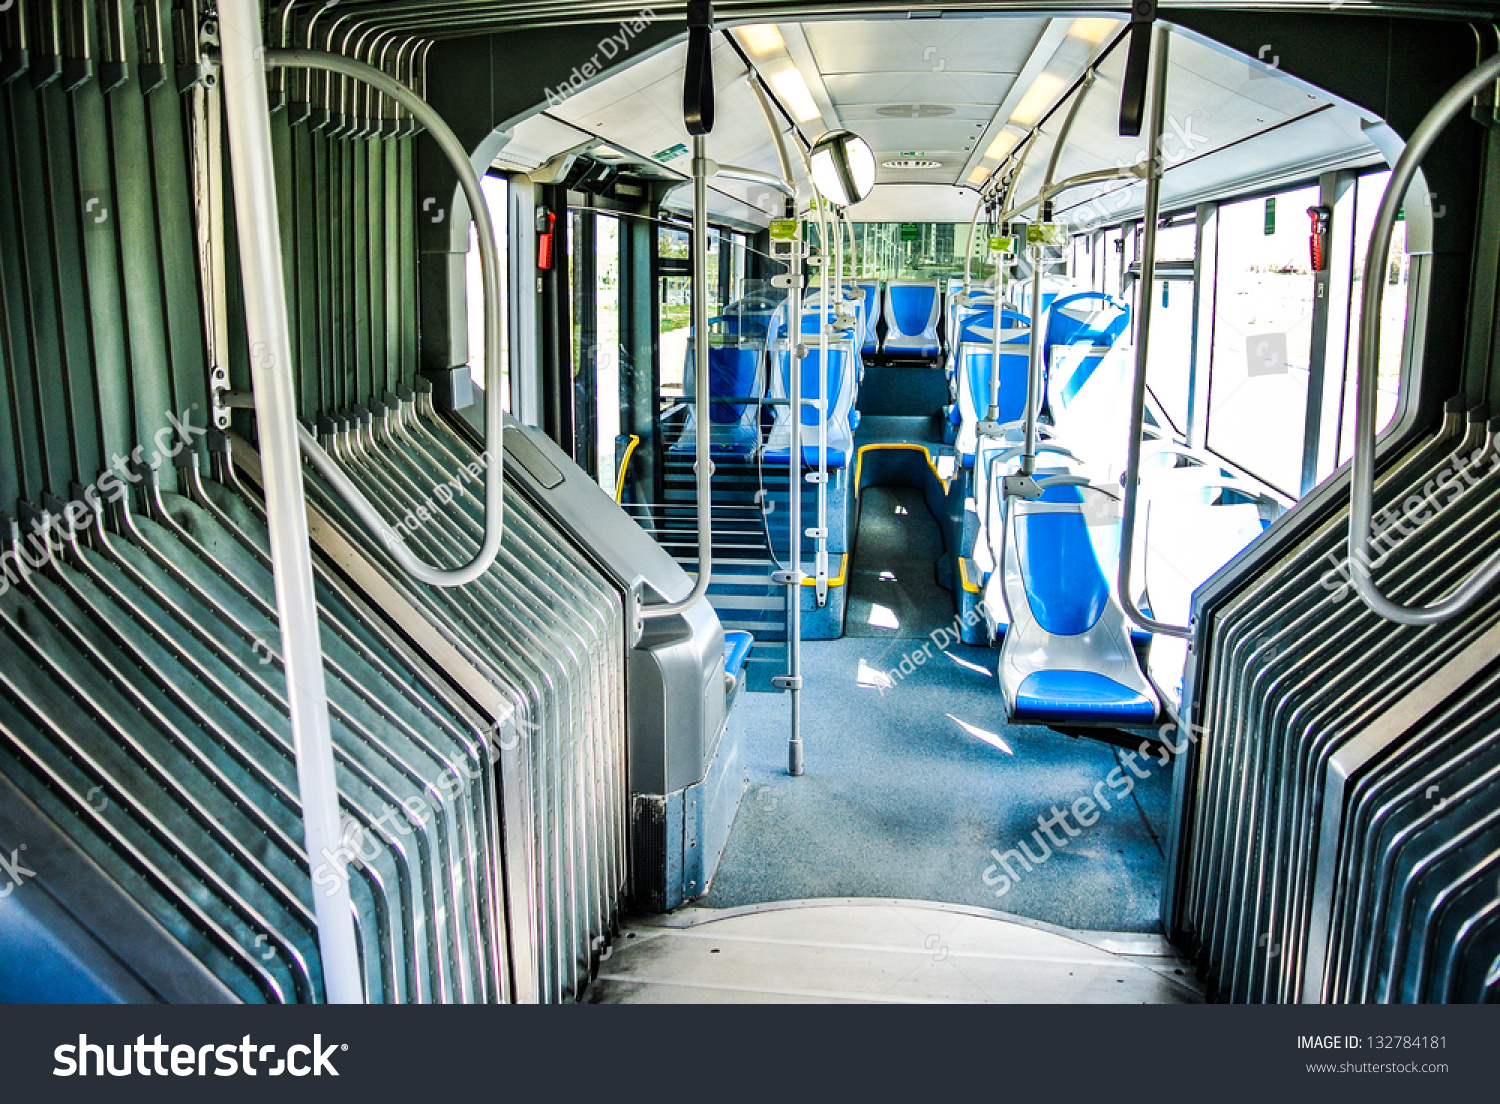 stock-photo-seats-of-an-articulated-bus-in-spain-132784181.jpg